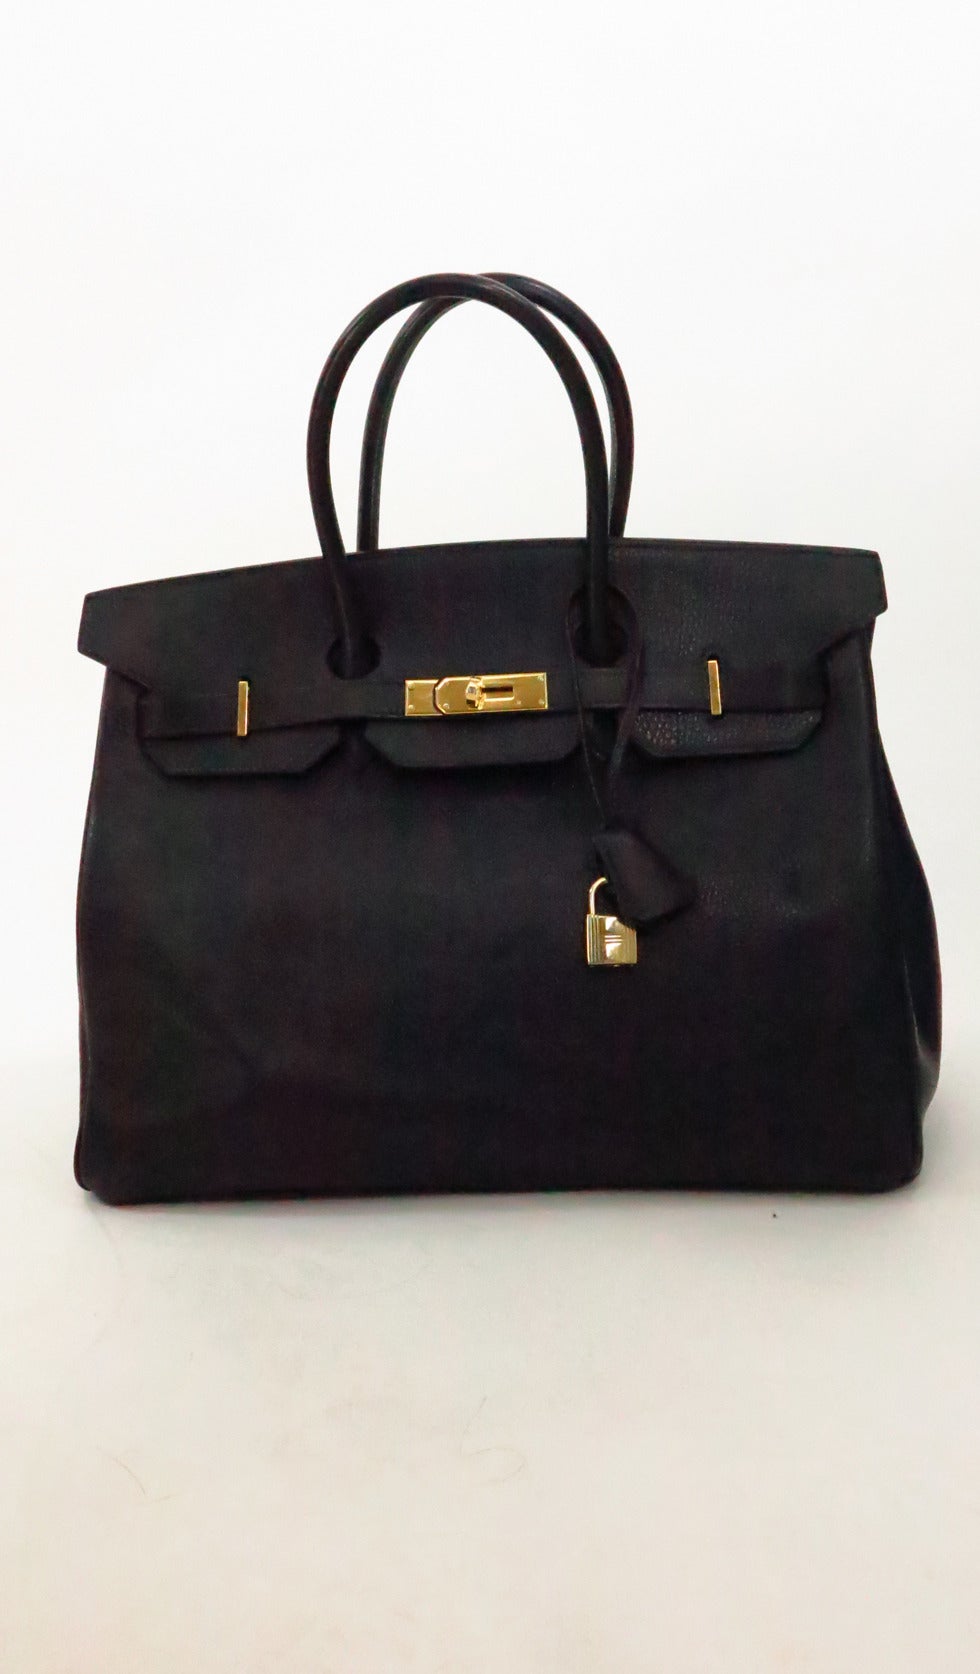 Hermes black Togo leather 35 cm Birkin handbag with gold hardware dated B in square,1998...Single inside zipper compartment...Togo is a scratch resistant leather that is made of calf leather that has a defined soft pebbled finish that appears raised